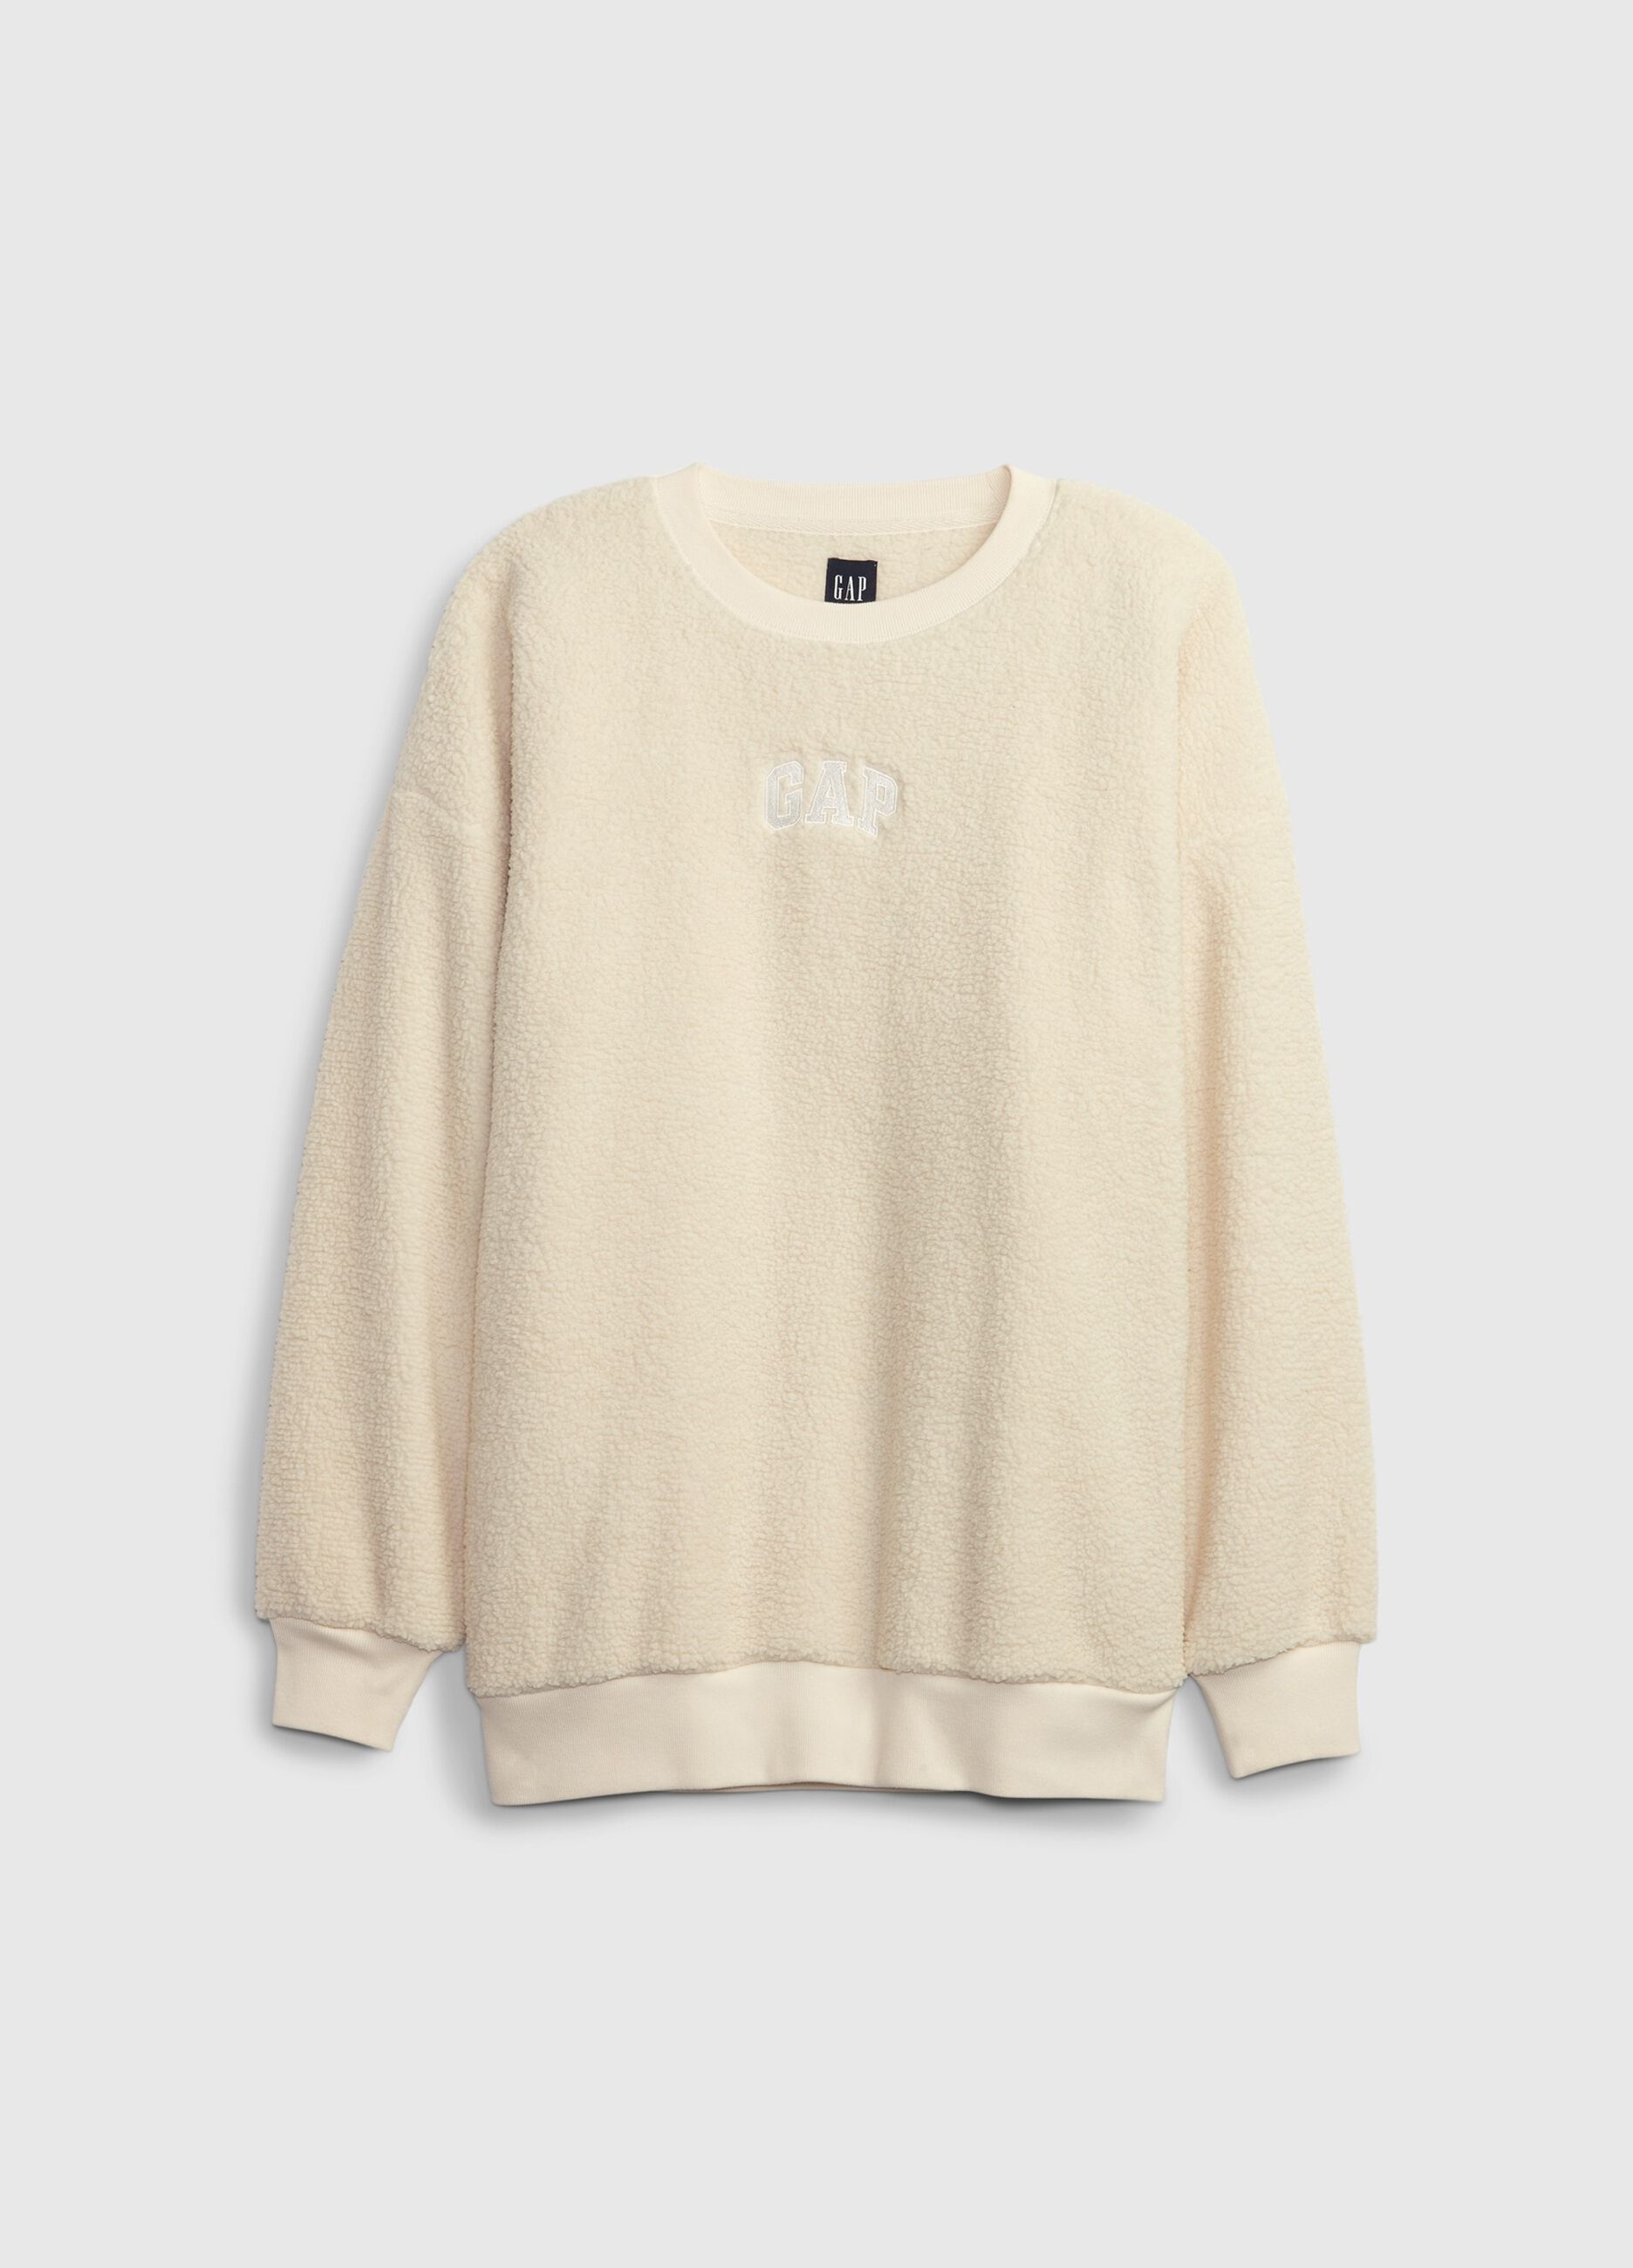 Oversized sweatshirt in sherpa with logo embroidery_3